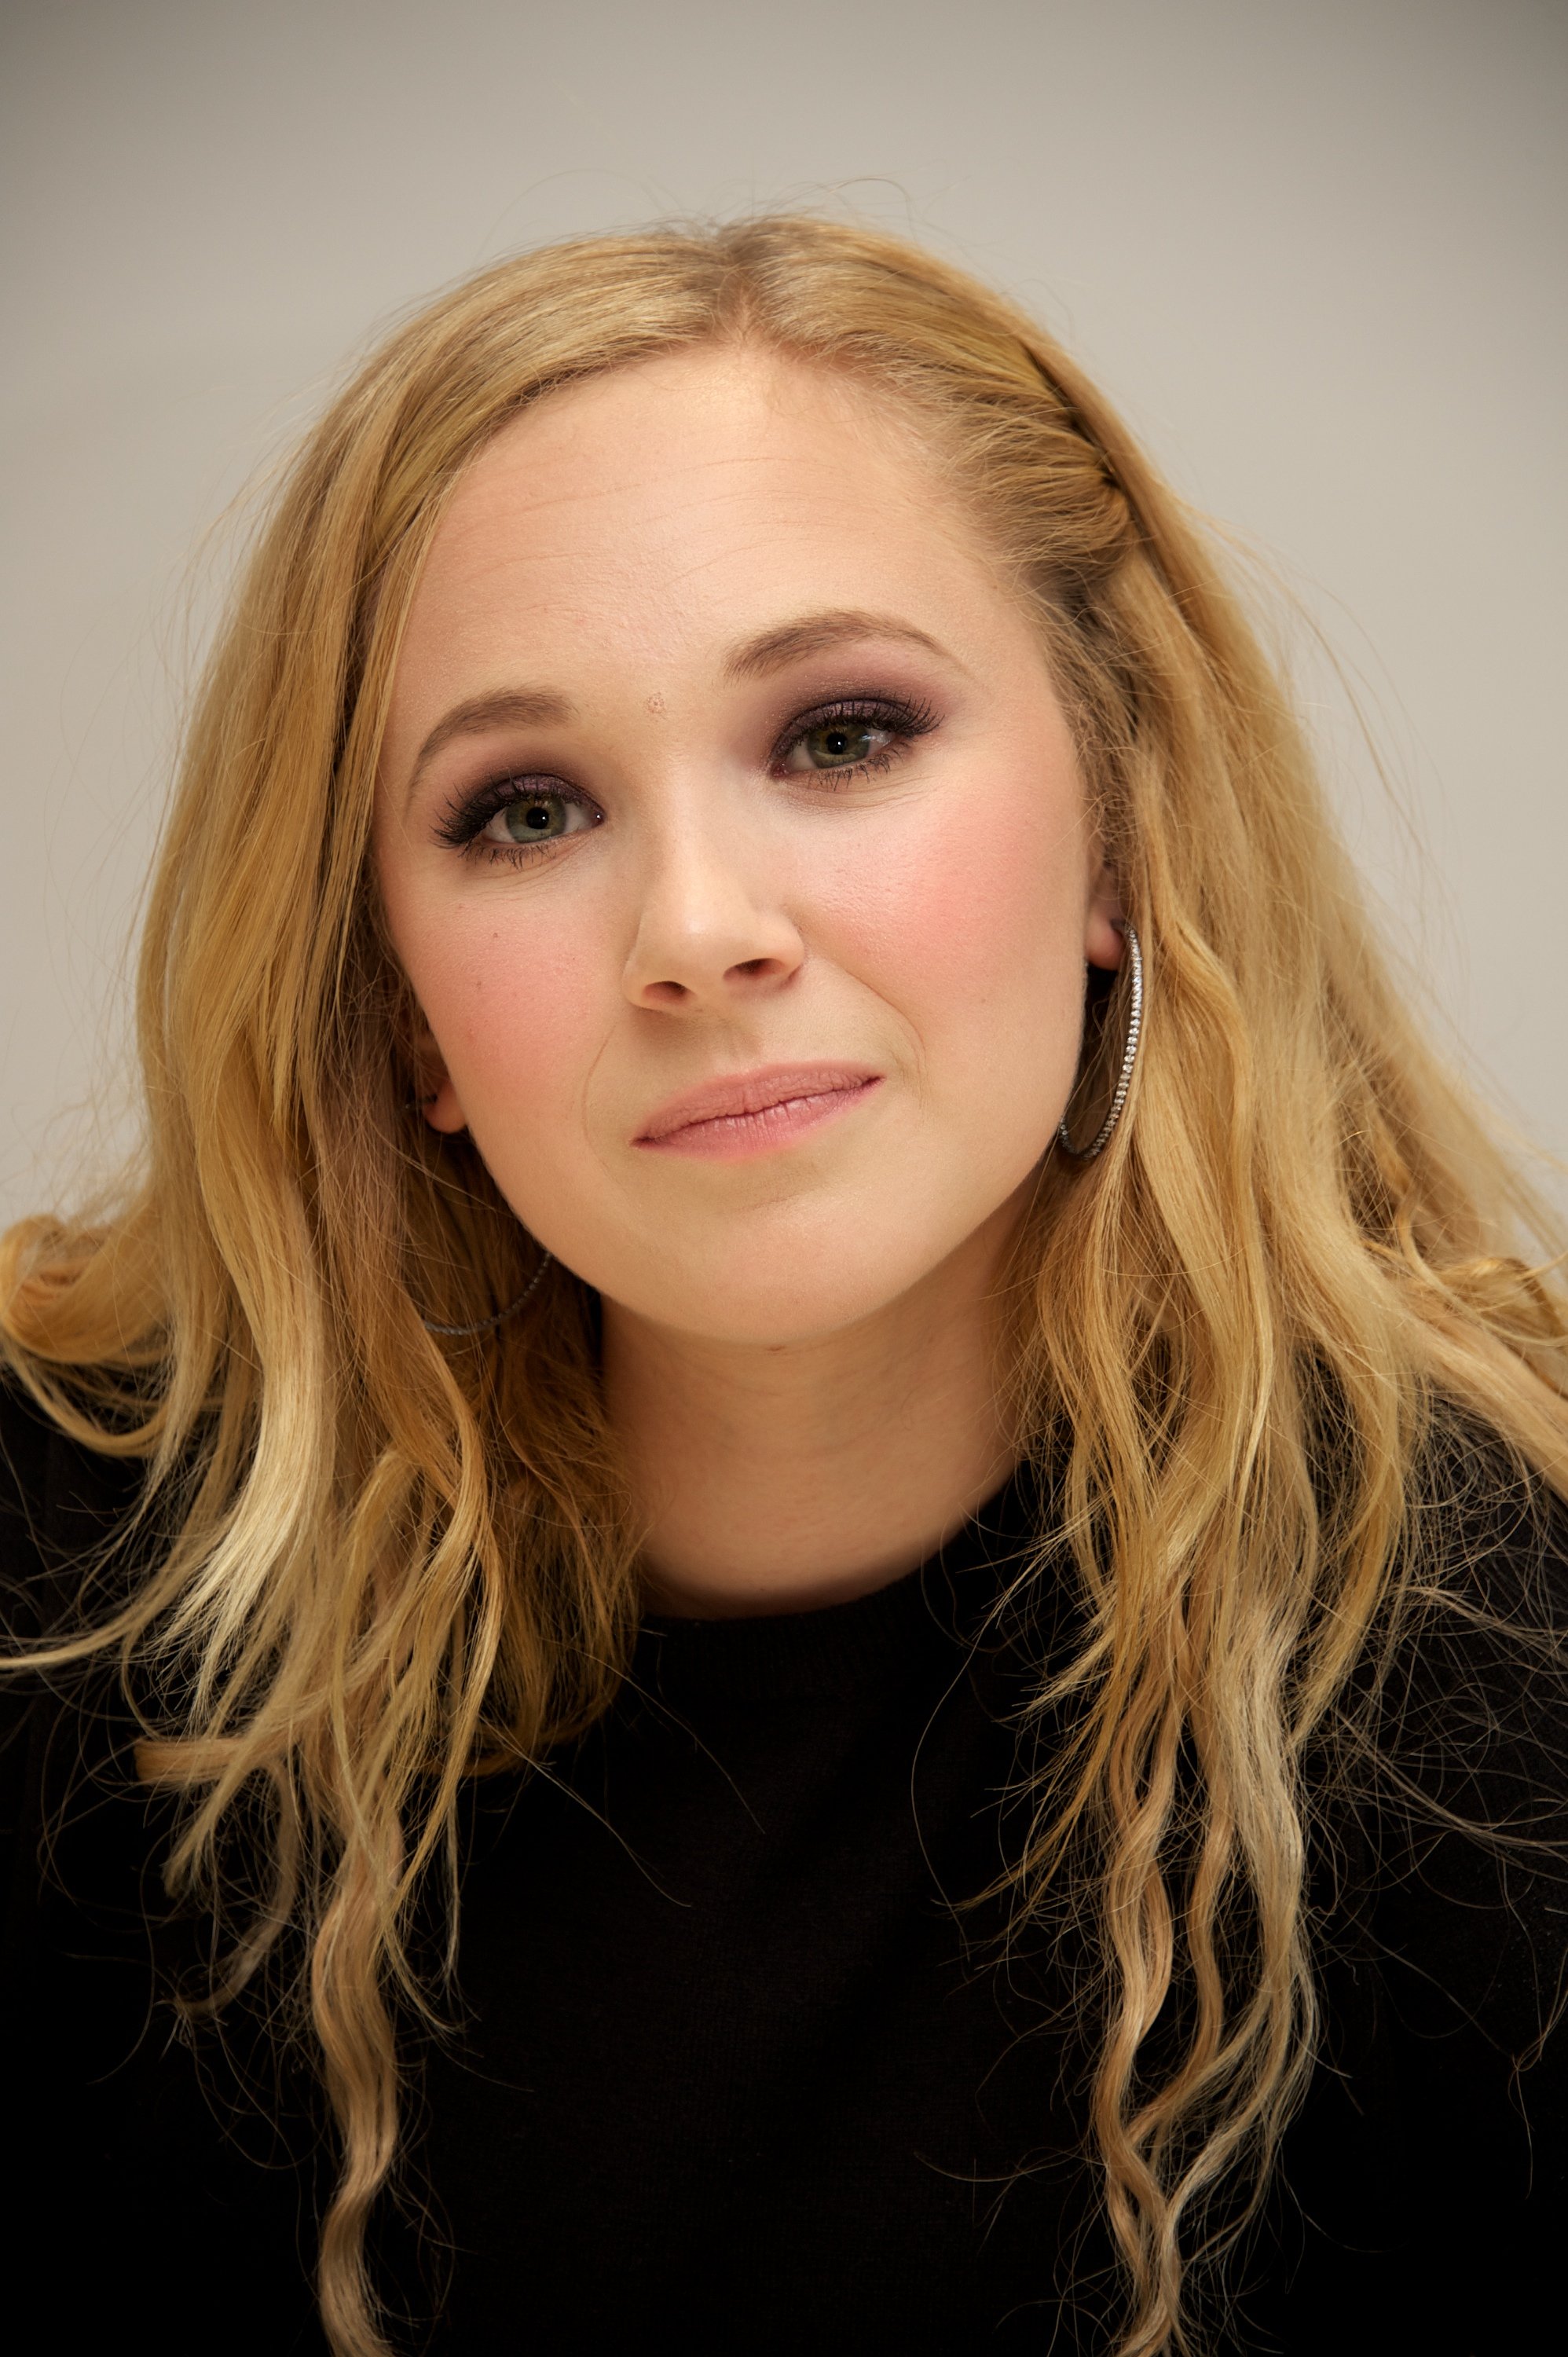 Juno Temple at the "Killer Joe" Press Conference hosted at Beverly Hills, California's Four Seasons Hotel, on July 18, 2012. | Source: Getty Images